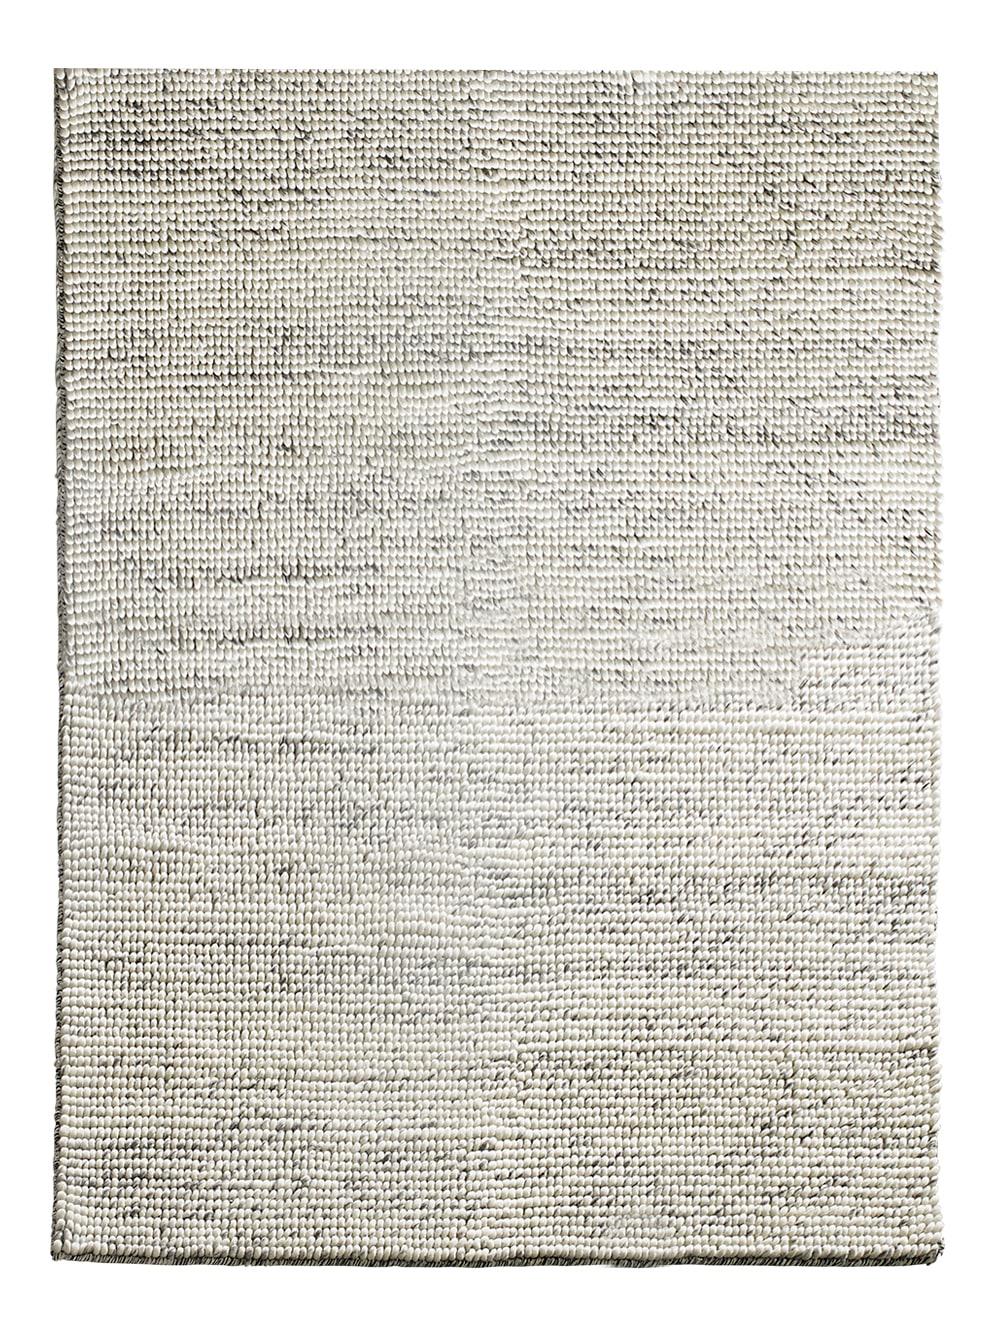 Mixed grey bubbles carpet by Massimo Copenhagen
Handwoven
Materials: 100% Felted New Zealand wool.
Dimensions: W 200 x H 300 cm.
Available colors: Cream and Mixed Grey.
Other dimensions are available: 140x200 cm, 170x240 cm, and special